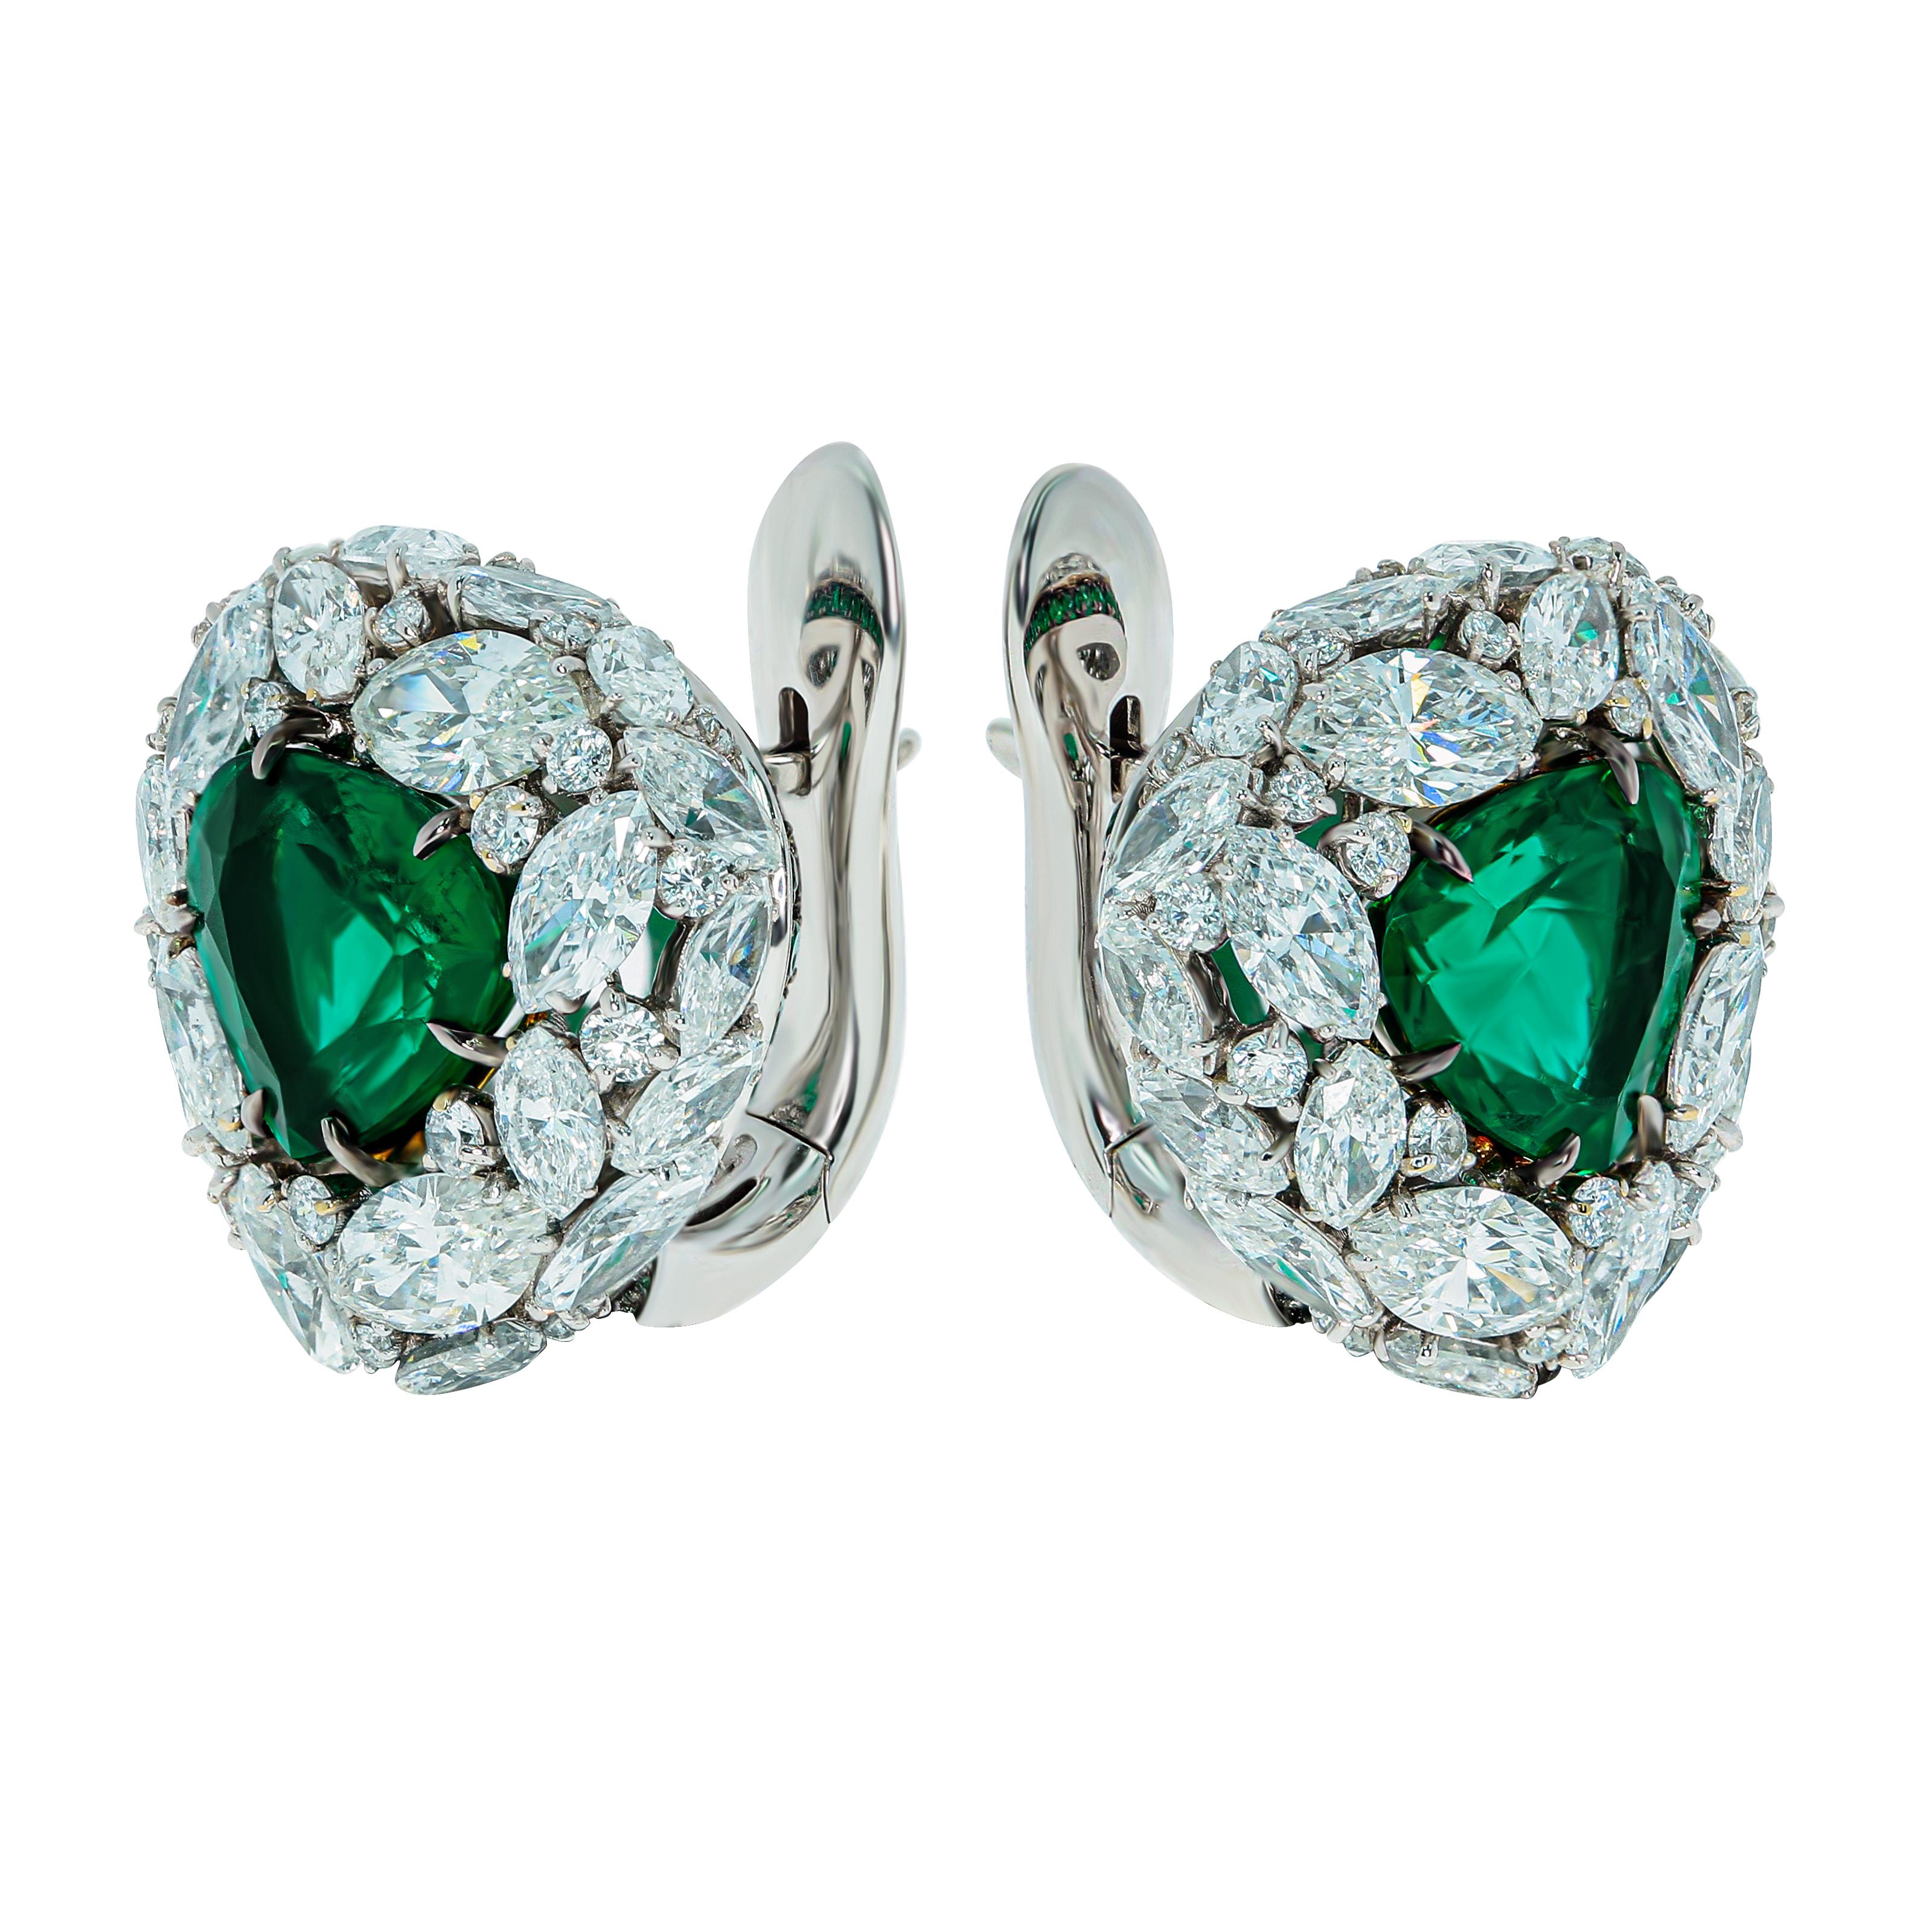 Emerald 4.05 Carat Diamonds Emeralds 18 Karat White Gold Earrings

What could be more elegant than a combination of cold 18 Karat White Gold, Diamonds and a bright spot of color in the form of an Emerald? Right, nothing. 44 Marquise-shape Diamonds